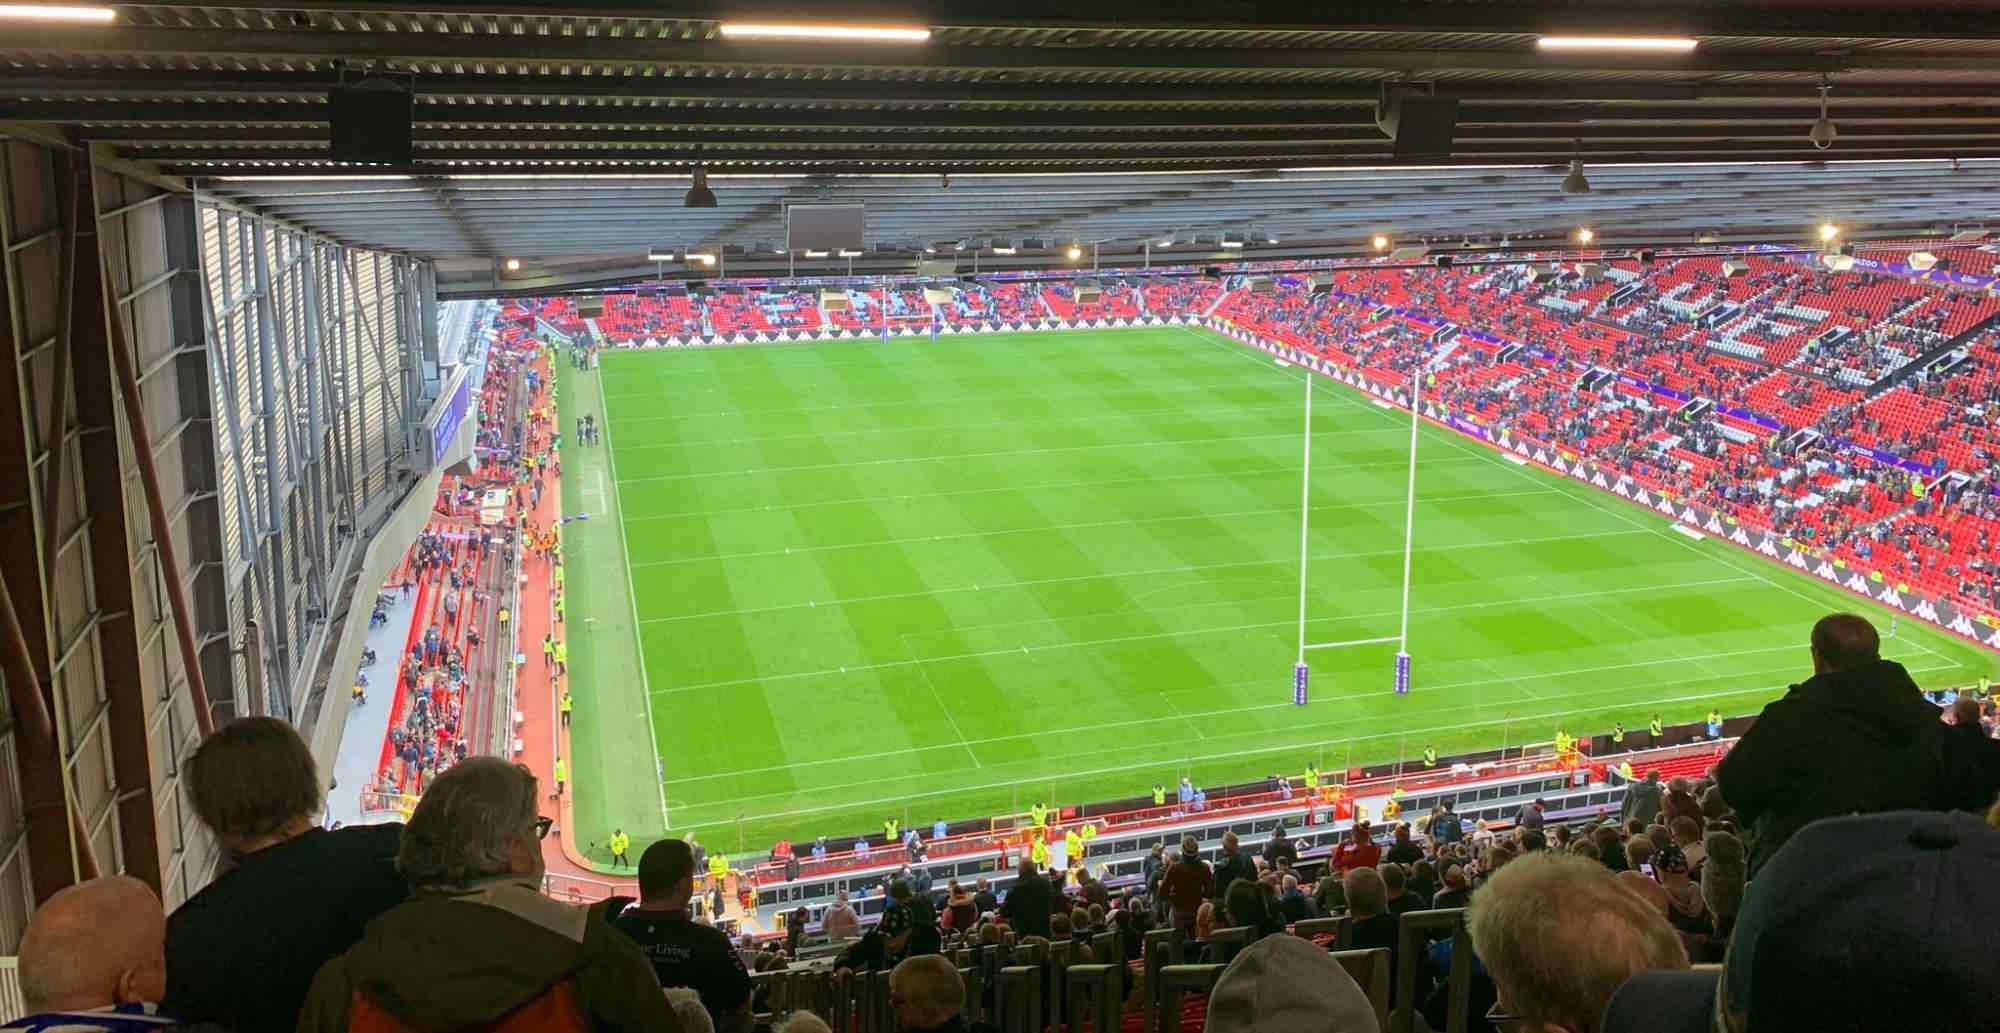 View of World Cup Rugby League Finals at Old Trafford from Seat Block E331